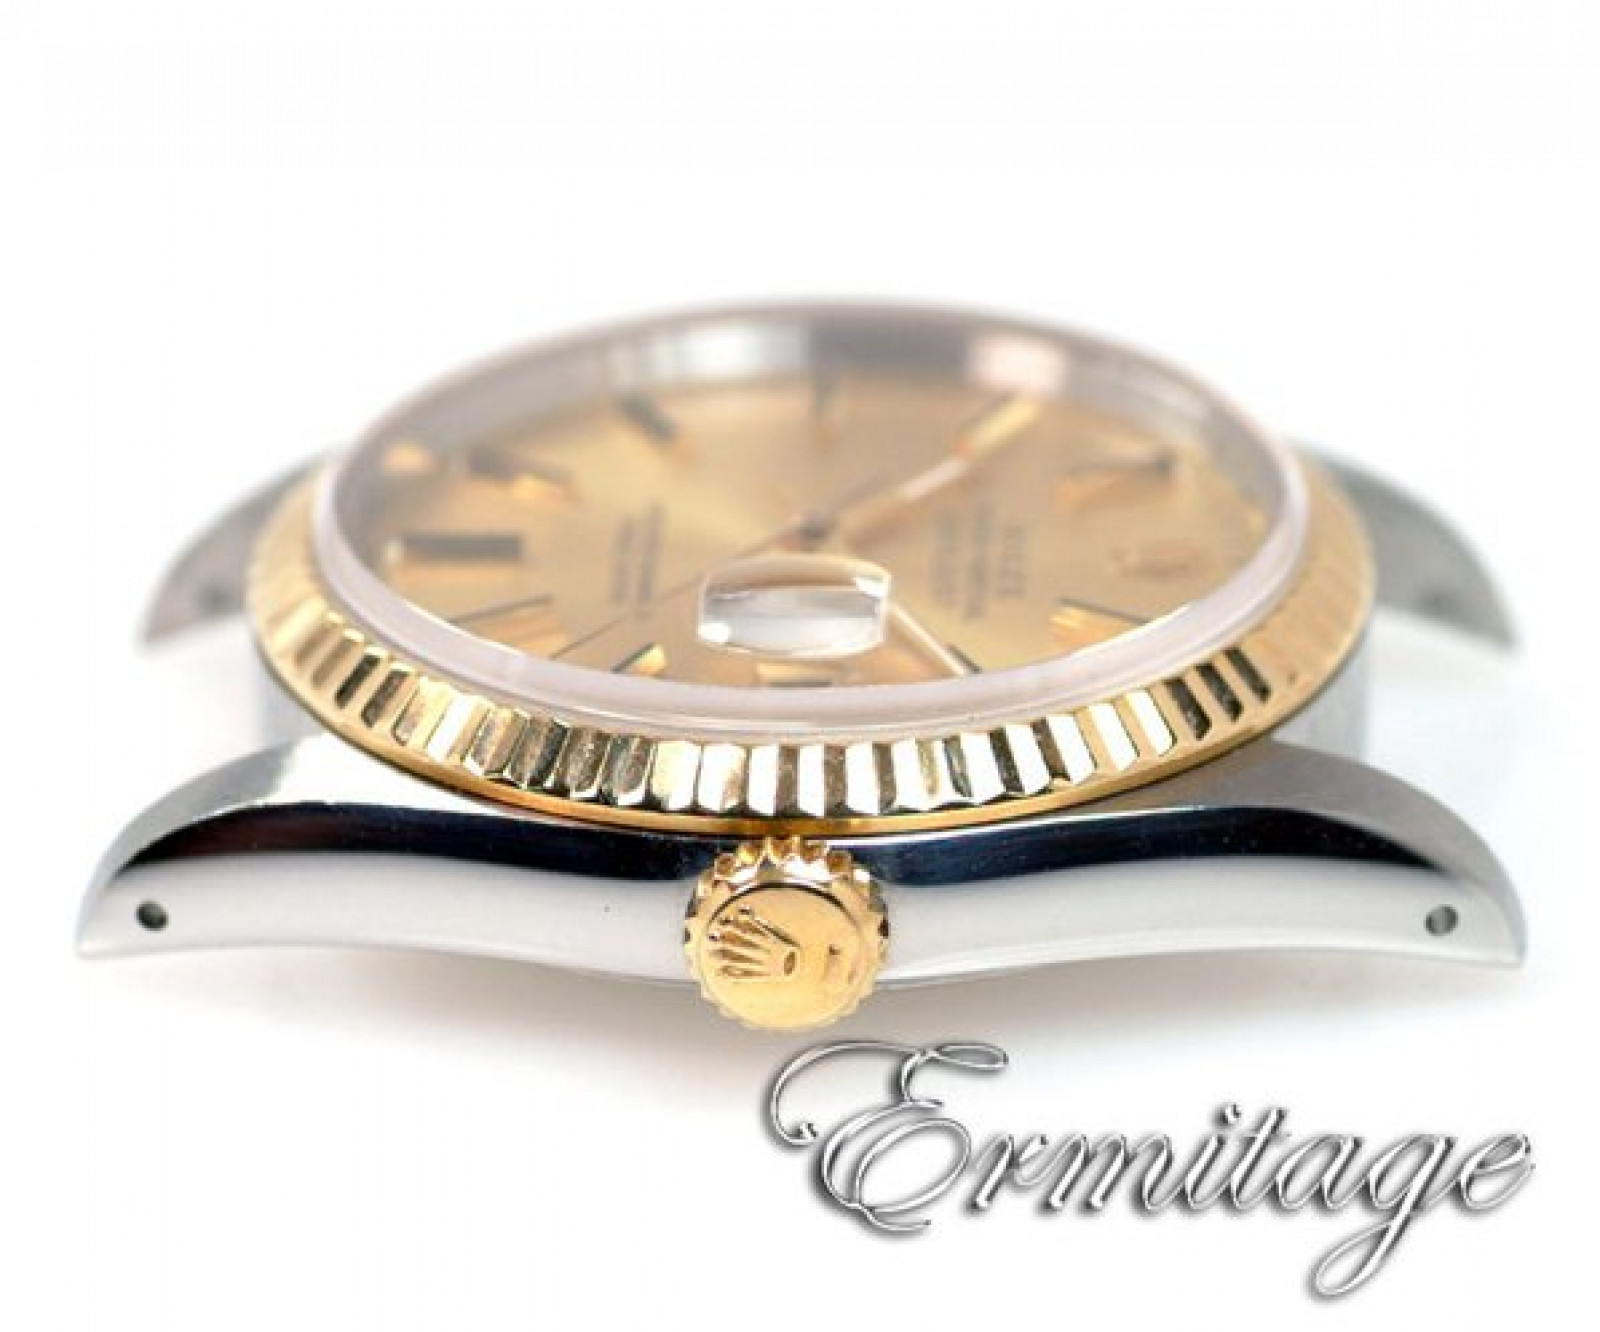 Sell Rolex Datejust 16233 Gold & Steel Today